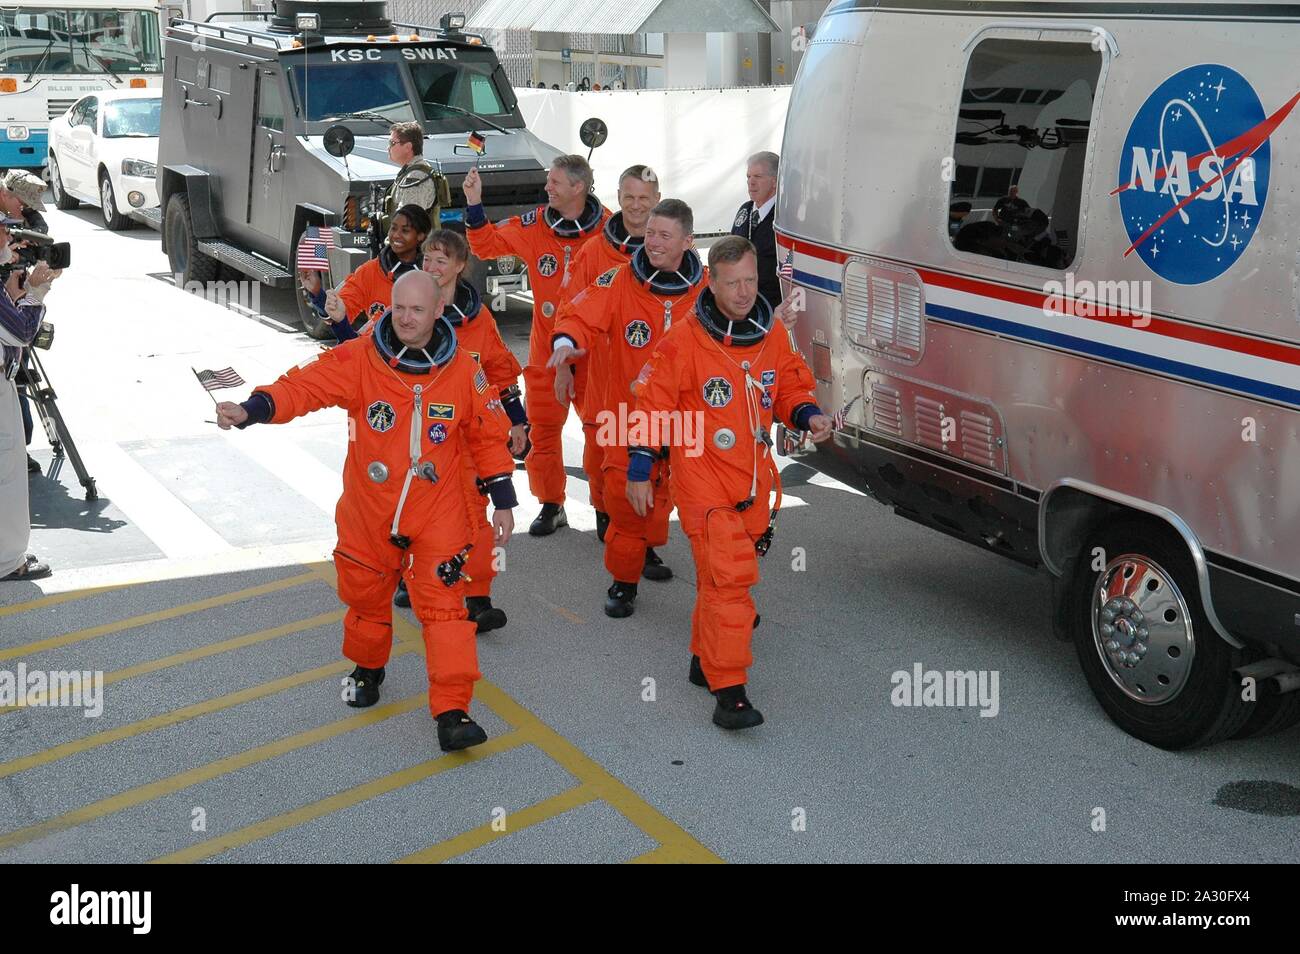 ***FILE PHOTO*** Archive Image relating to the film, Lucy In The Sky, loosely based on the events surrounding the love triangle involving Astronaut Lisa Nowak. FILE: In this photo released by NASA, waving flags for the Fourth of July, the STS-121 crew heads for the Astrovan and the ride to Launch Pad 39B at the Kennedy Space Center, Florida on July 4, 2006 for a third launch attempt. Leading the way are Pilot Mark Kelly (left) and Commander Steven Lindsey (right). Behind them are, left and right, Mission Specialists (second row) Lisa Nowak and Michael Fossum; (third row) Stephanie Wilson and Stock Photo